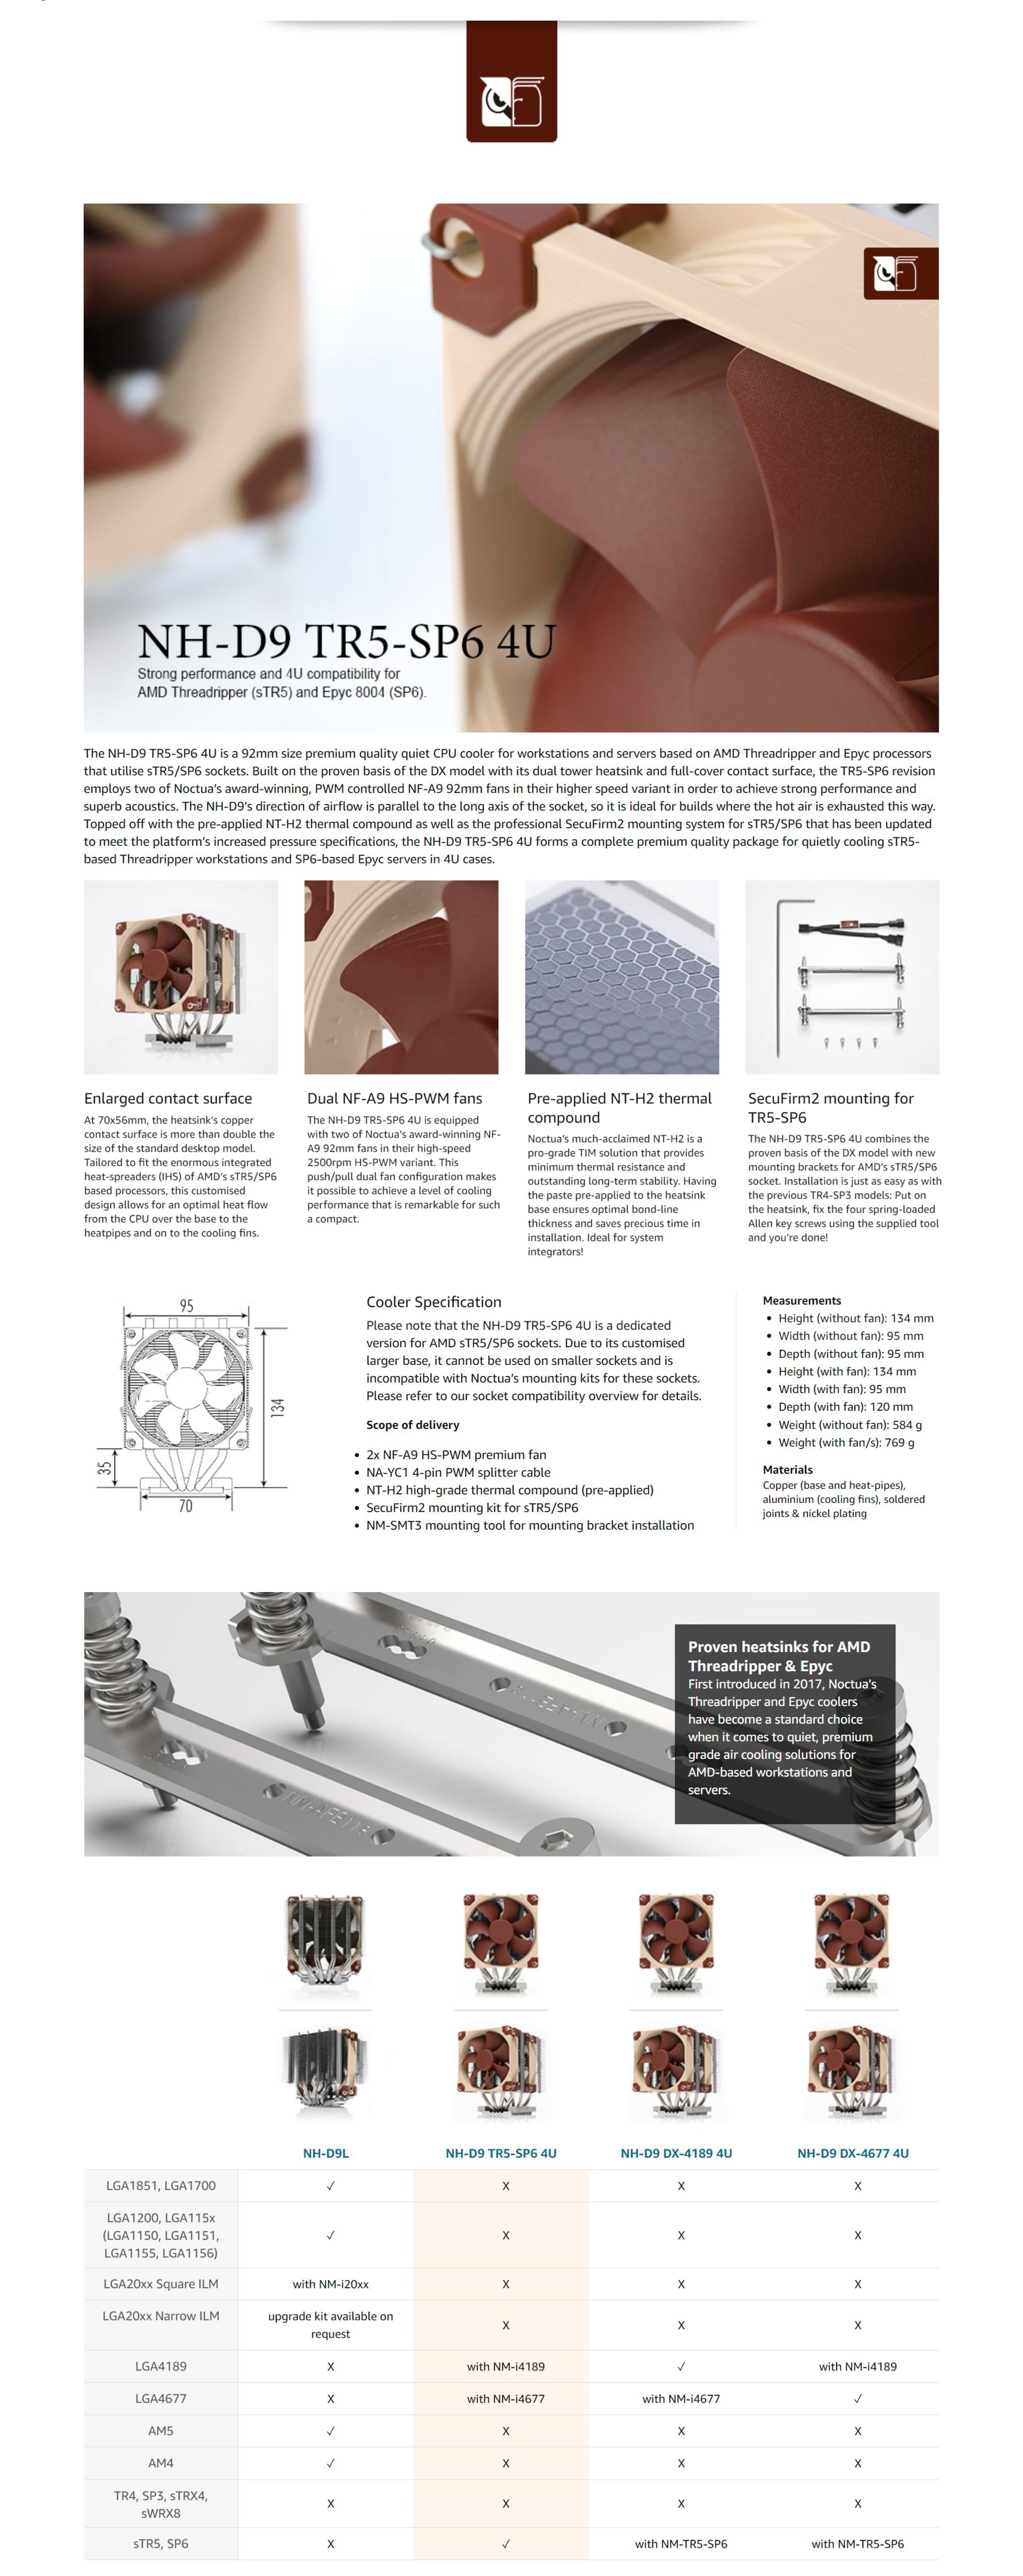 A large marketing image providing additional information about the product Noctua NH-D9 TR5-SP6 4U CPU Cooler - Additional alt info not provided